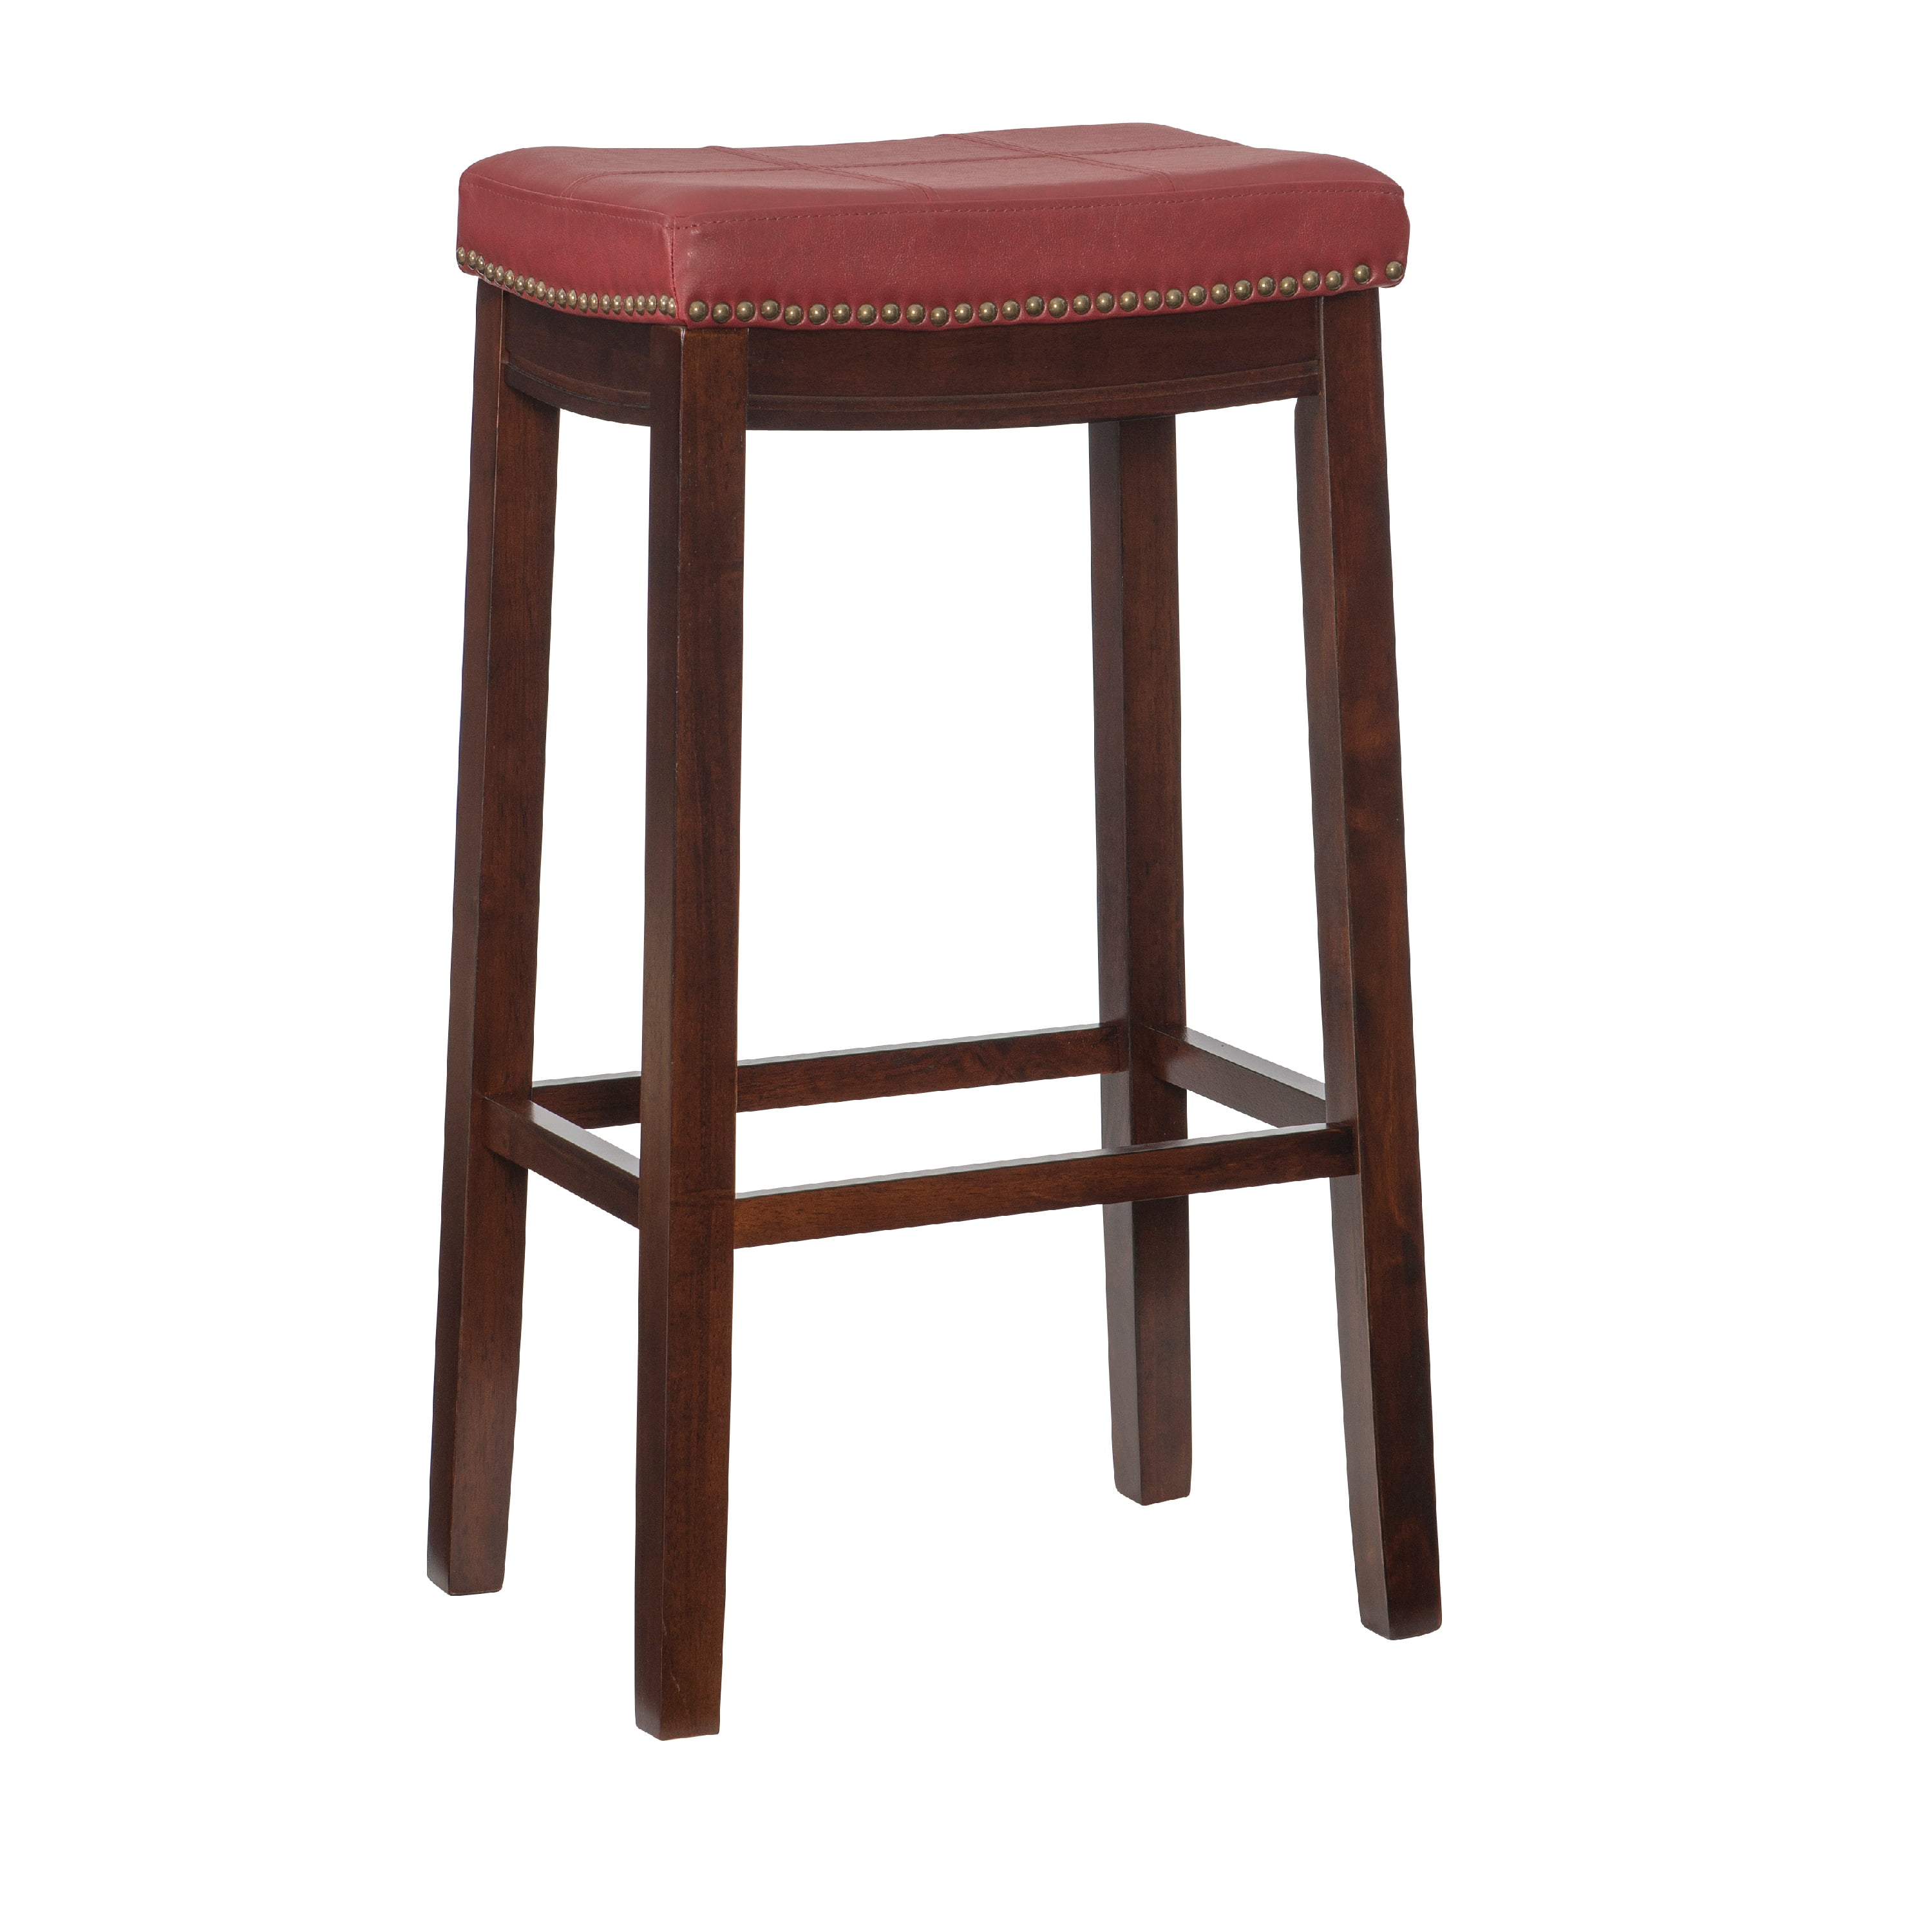 Red Leather Bar Stool With Back 34" Seat Height Nail Heads Espresso Wood Frame S 